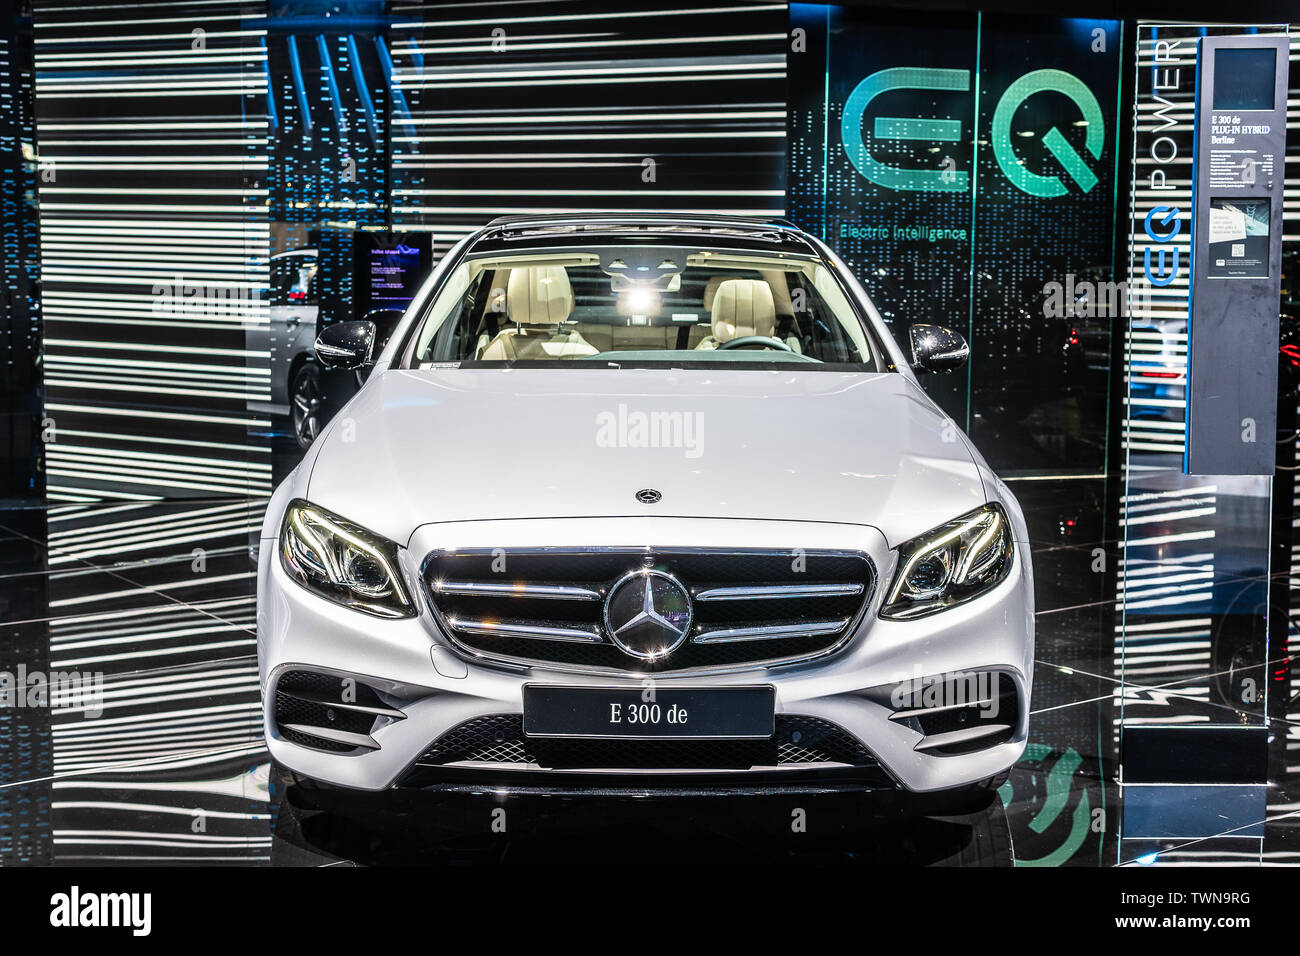 Page 8 Mercedes Estate High Resolution Stock Photography And Images Alamy